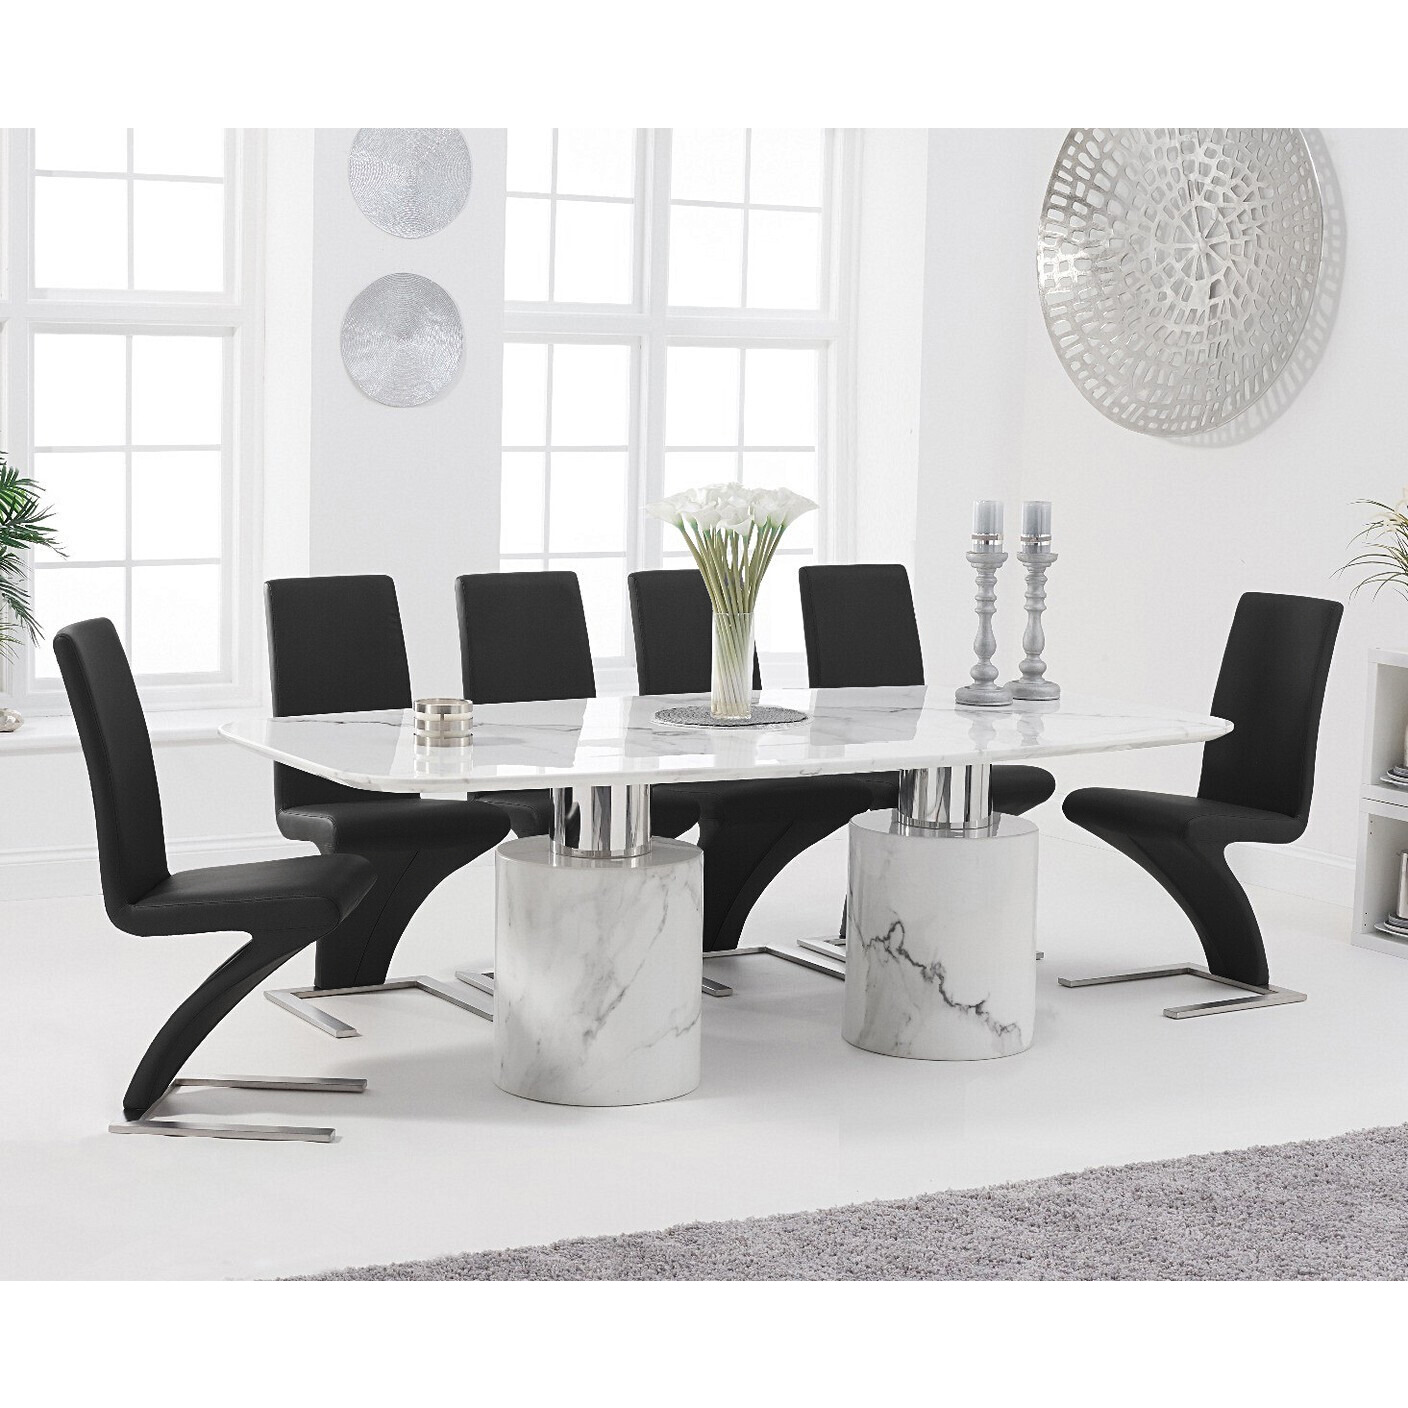 Antonio 220cm White Marble Dining Table With 6 Black Aldo Z Chairs